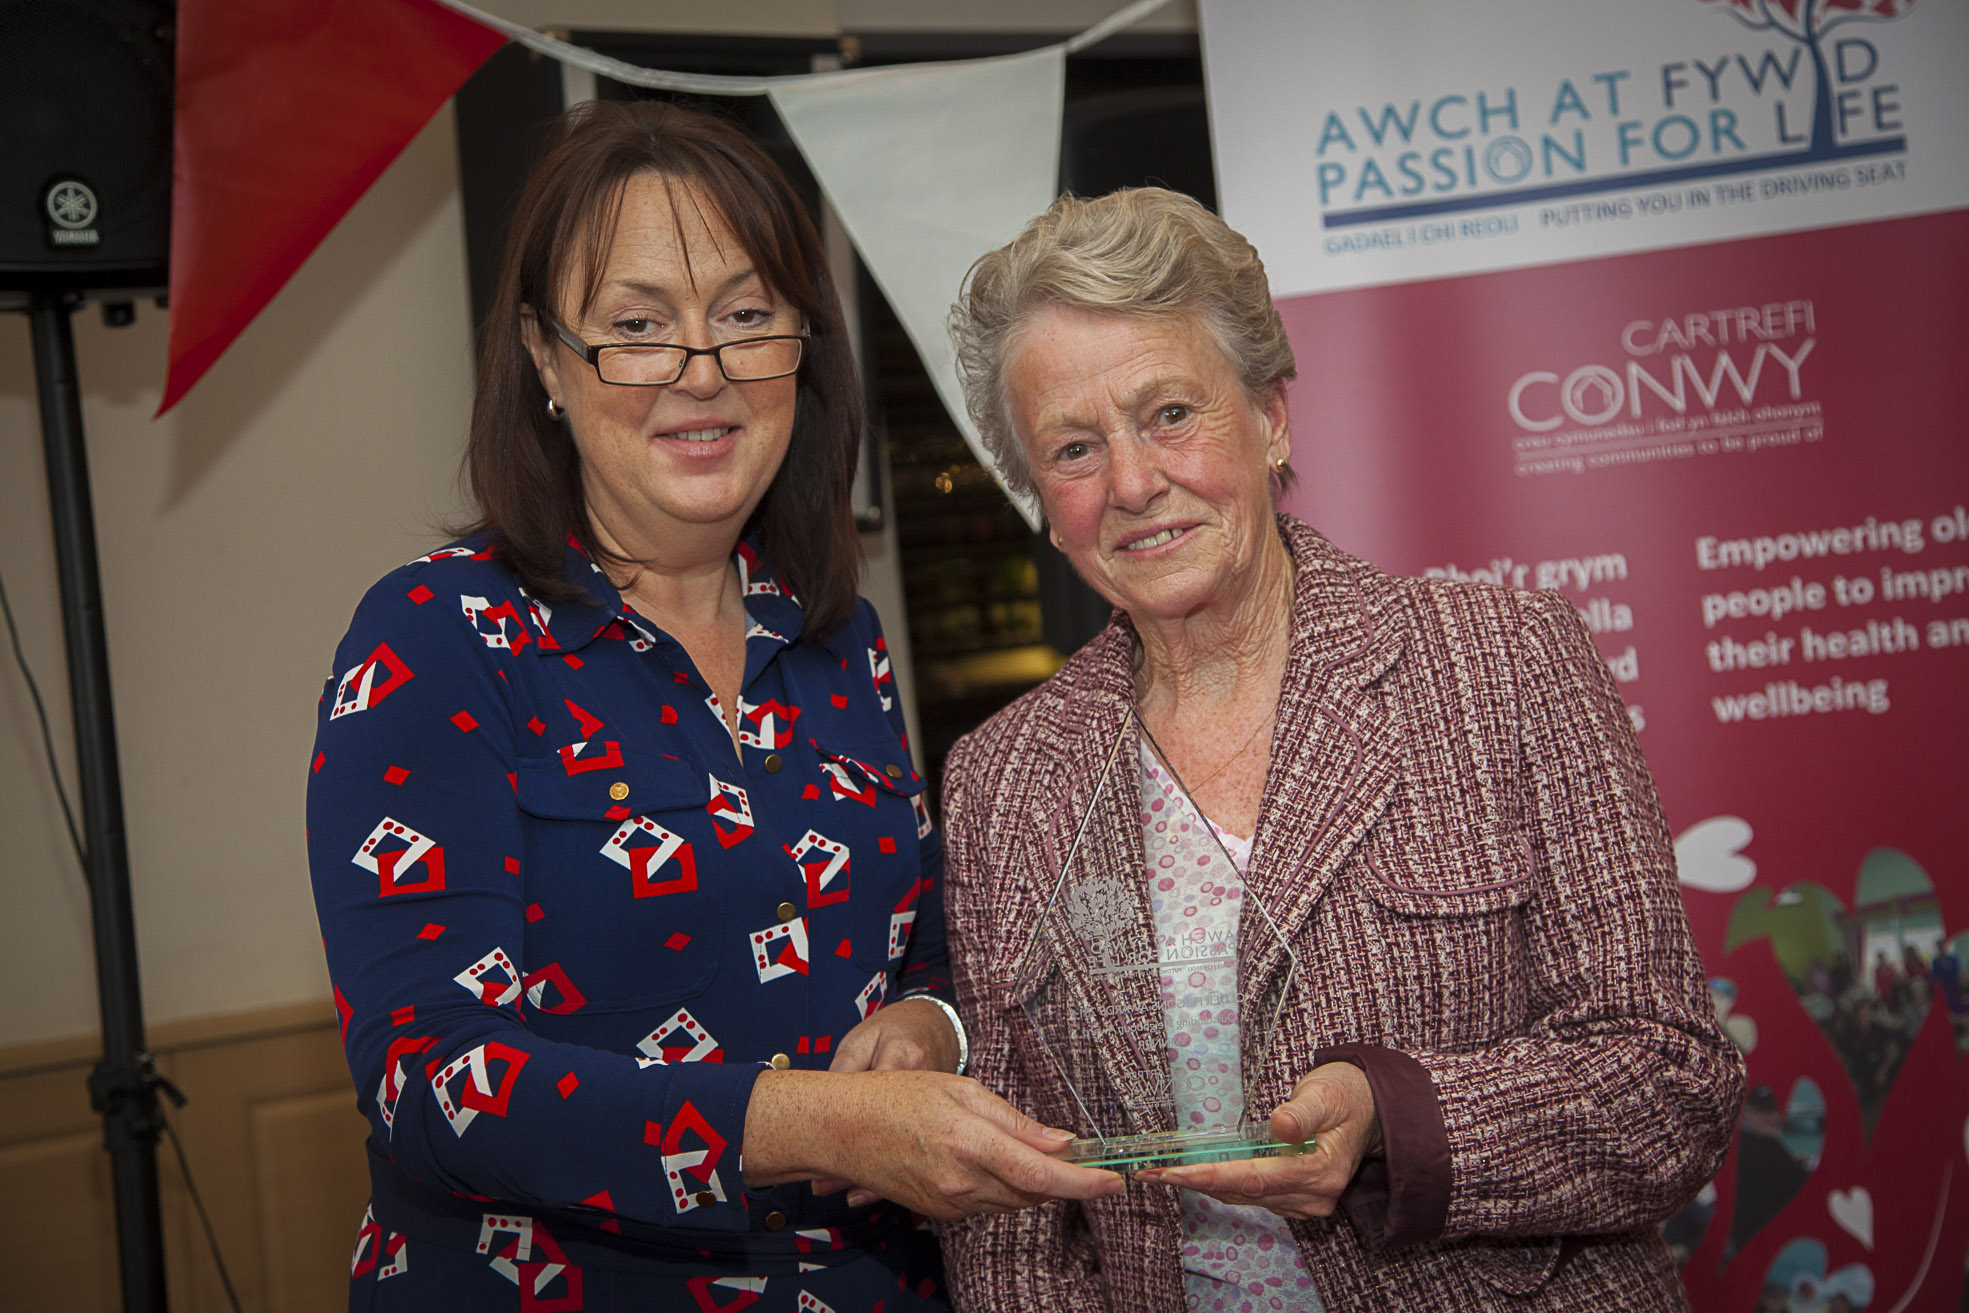 Community heroes honoured for “amazing” contribution